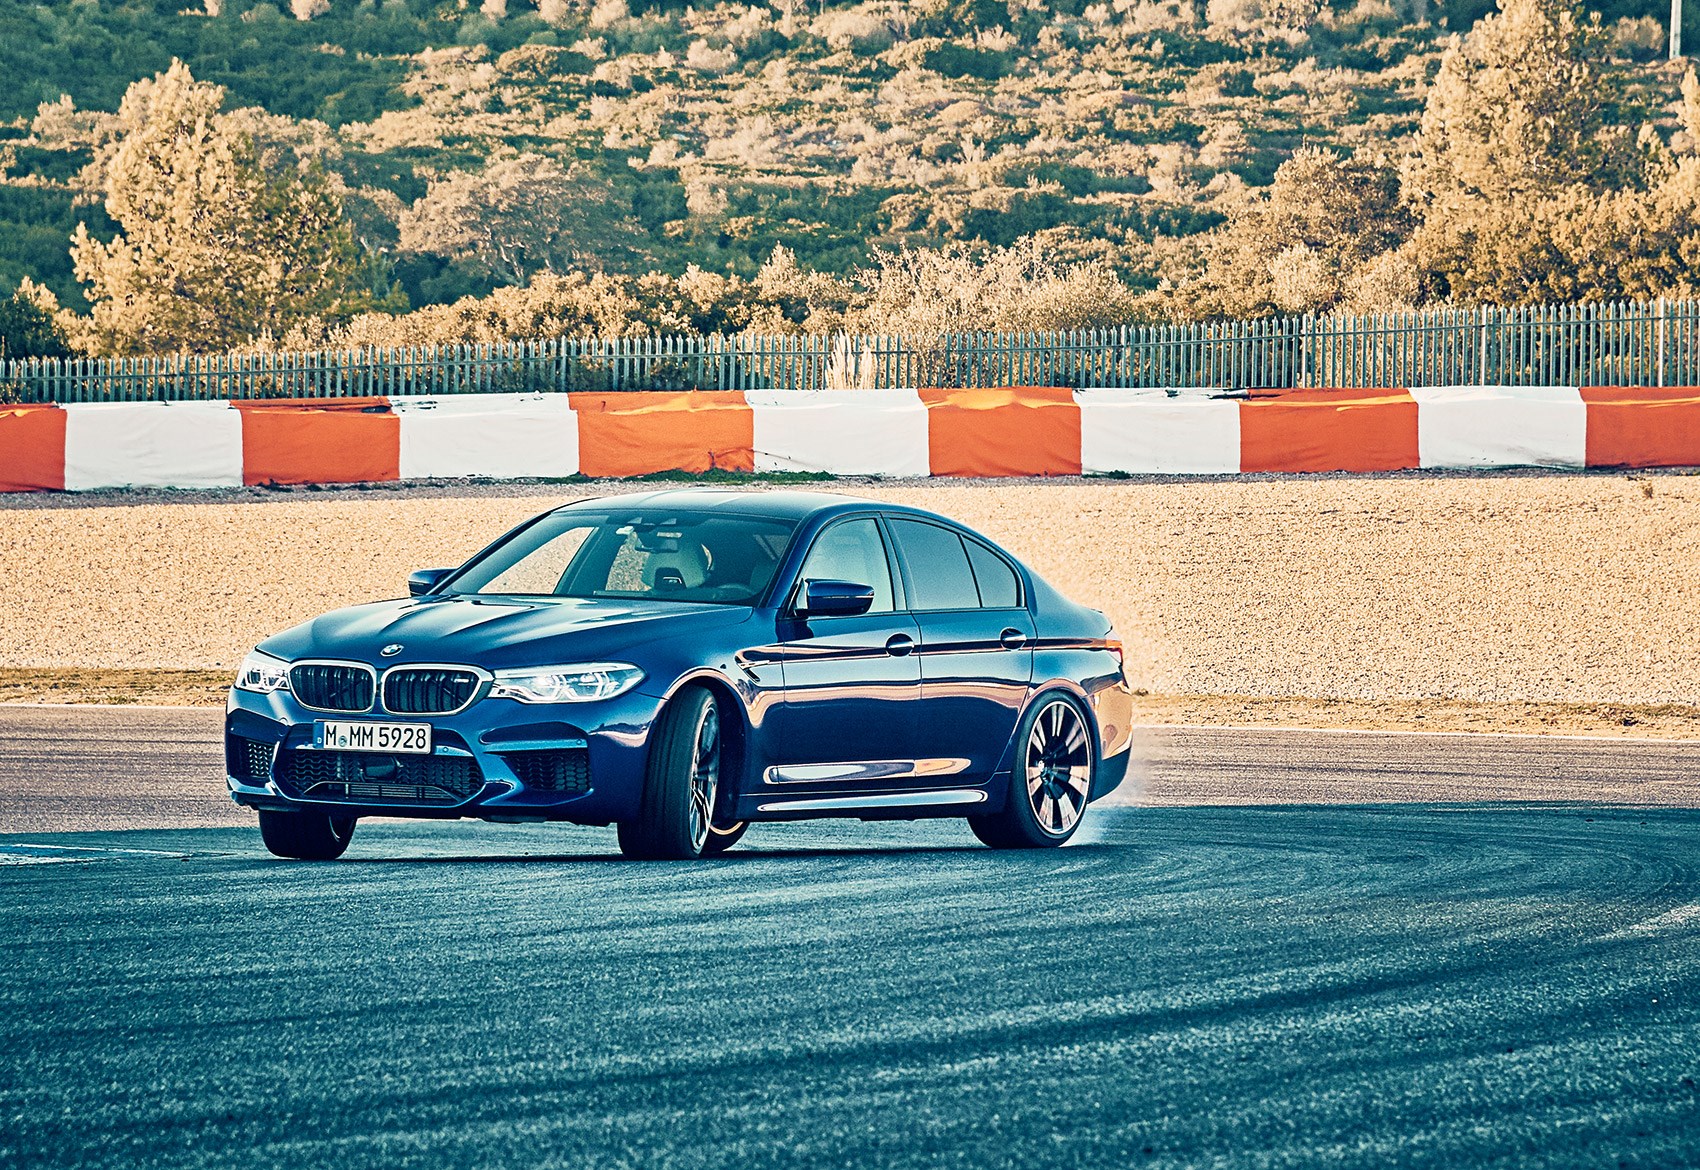 2013 BMW M5 : Latest Prices, Reviews, Specs, Photos and Incentives